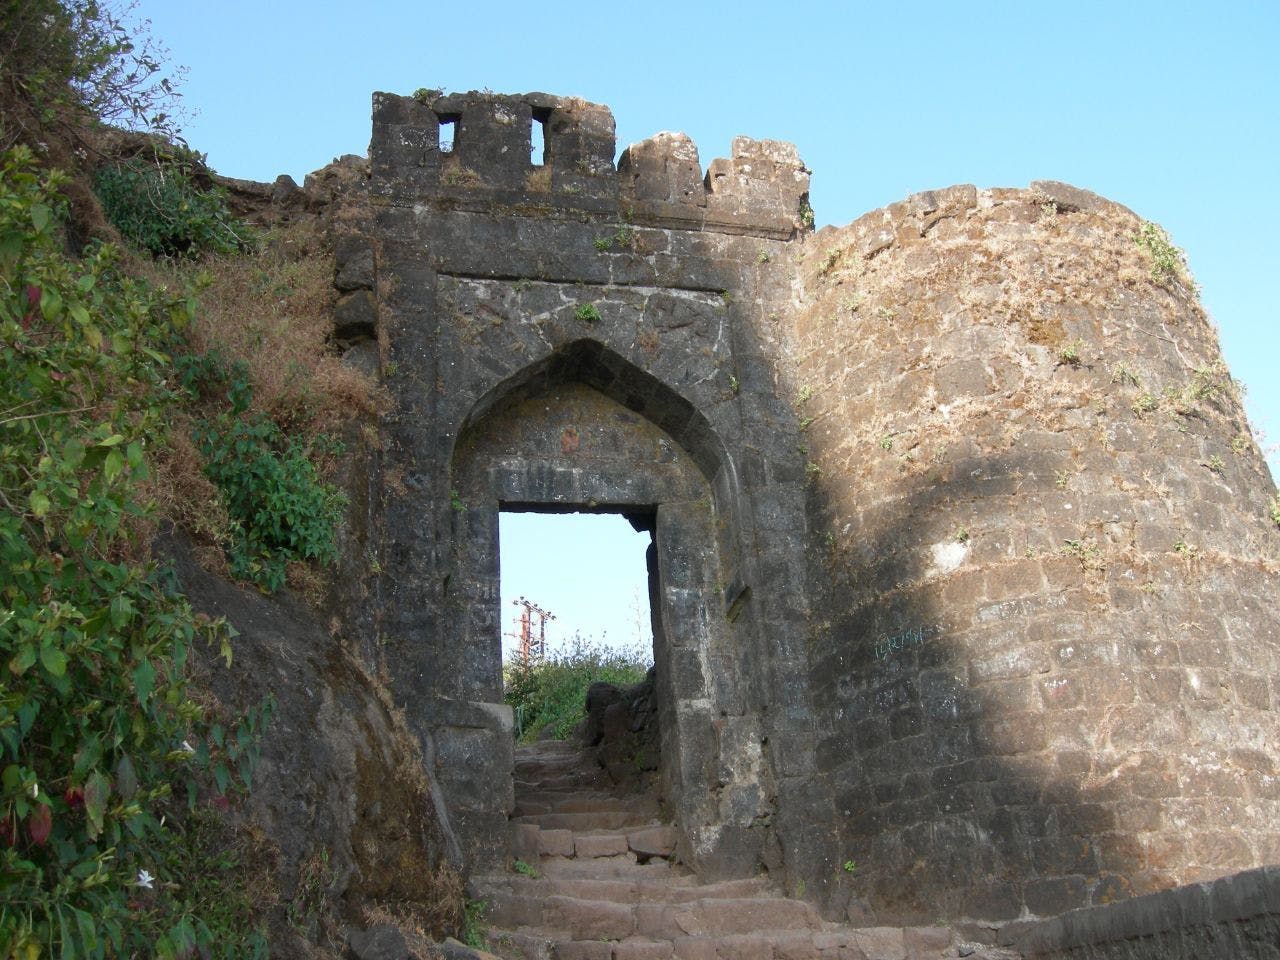 The entrance to the fort